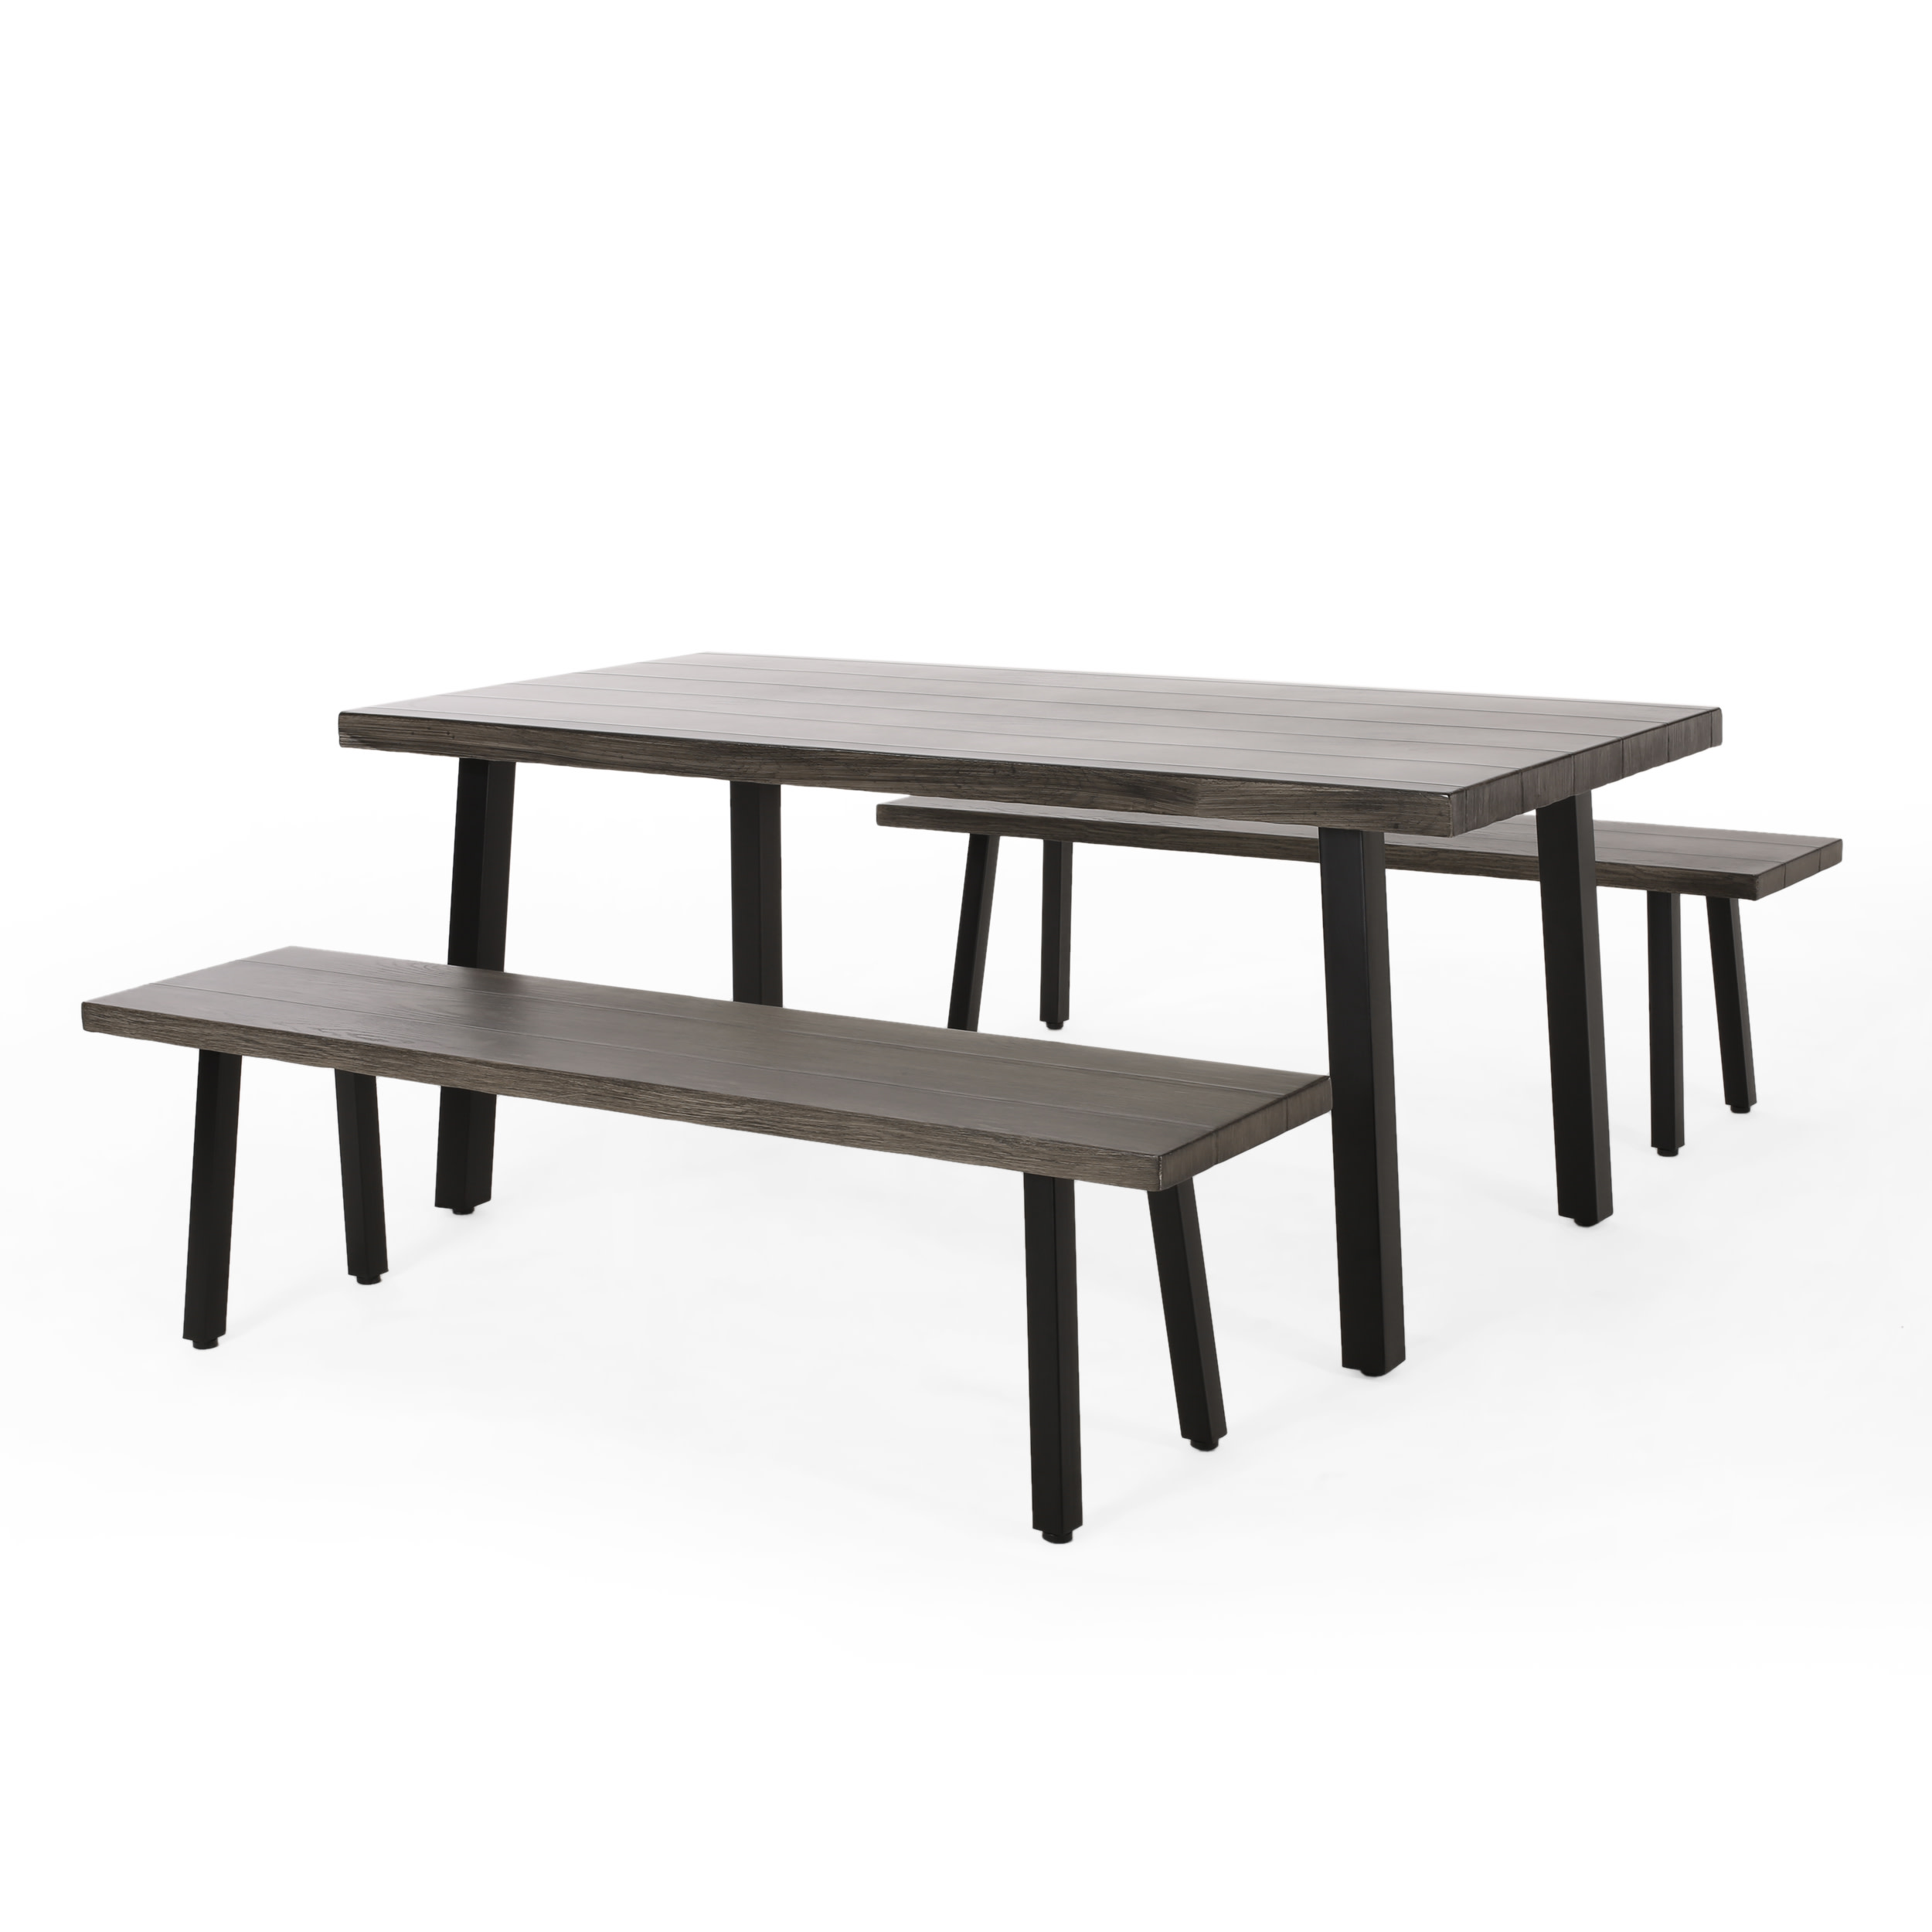 GDF Studio Altair Outdoor Modern Industrial 3 Piece Aluminum Dining Set with Benches, Gray and Matte Black - image 1 of 13